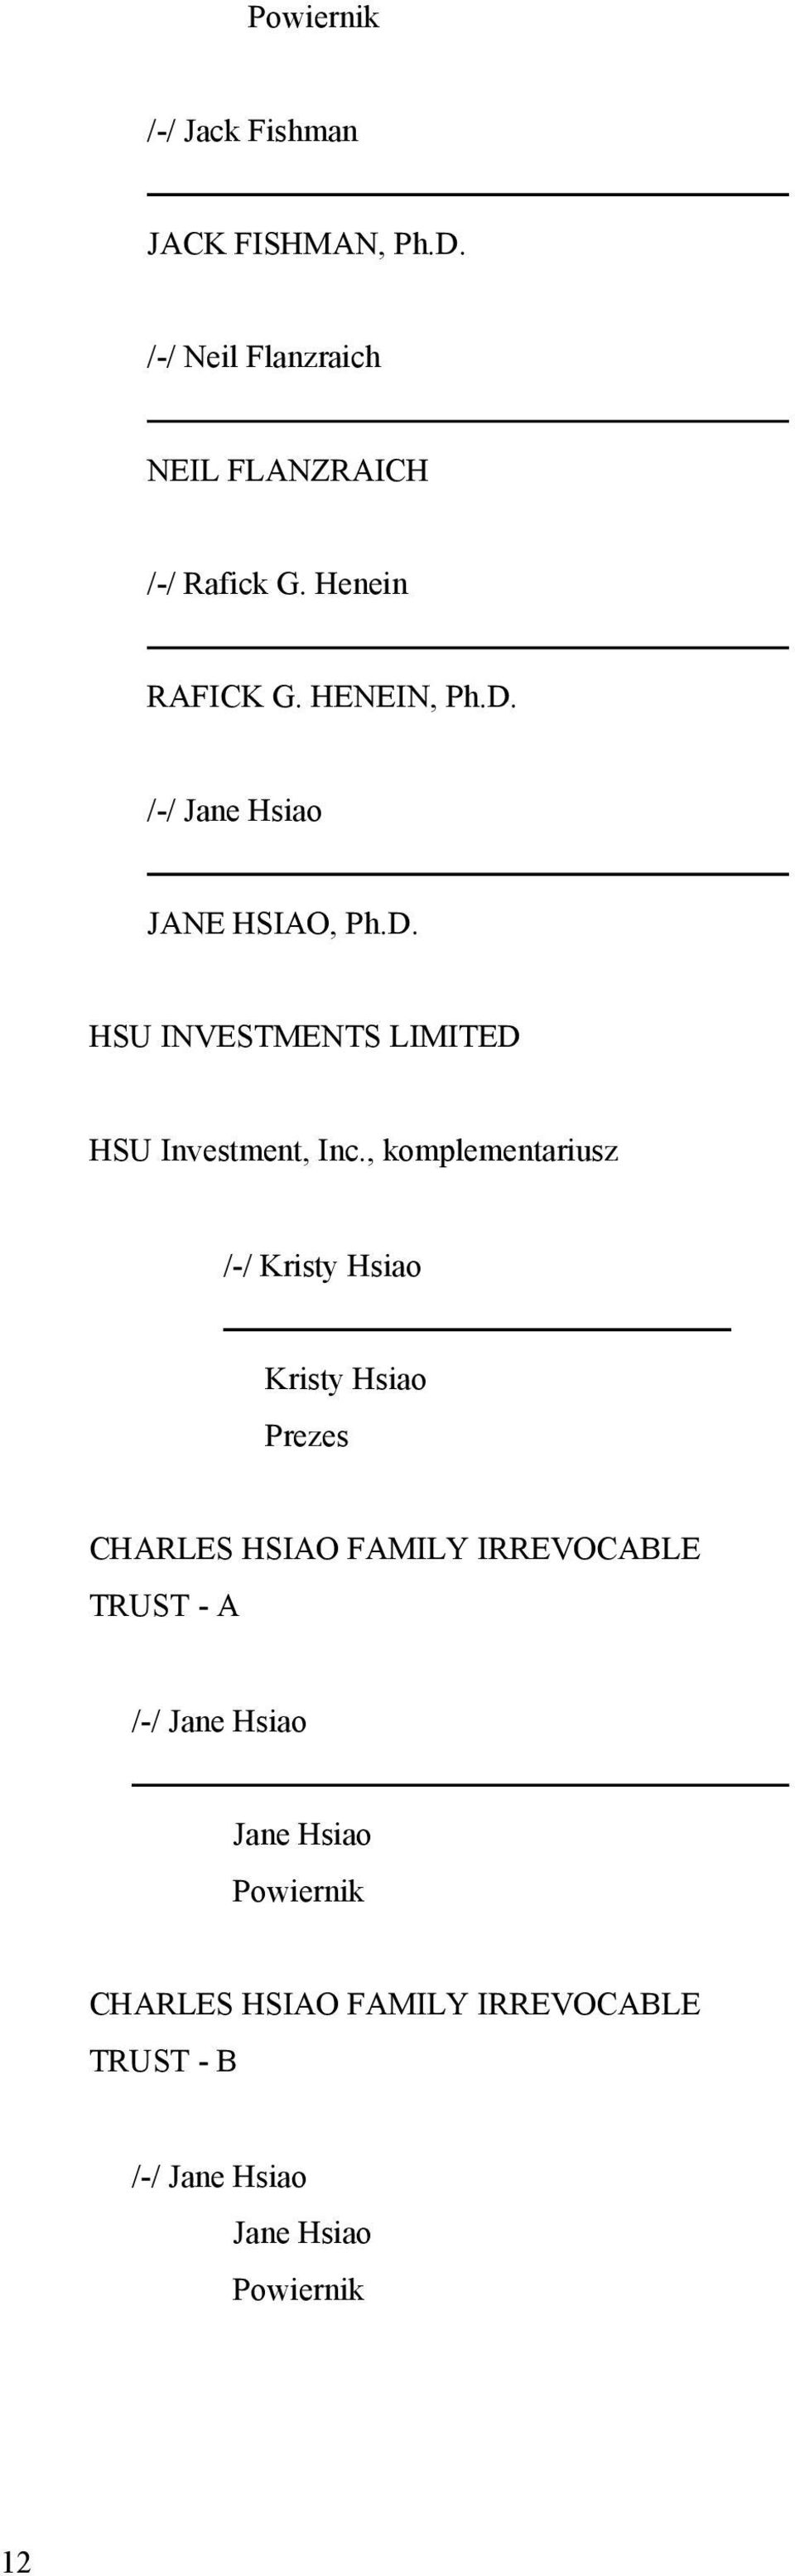 , komplementariusz /-/ Kristy Hsiao Kristy Hsiao Prezes CHARLES HSIAO FAMILY IRREVOCABLE TRUST - A /-/